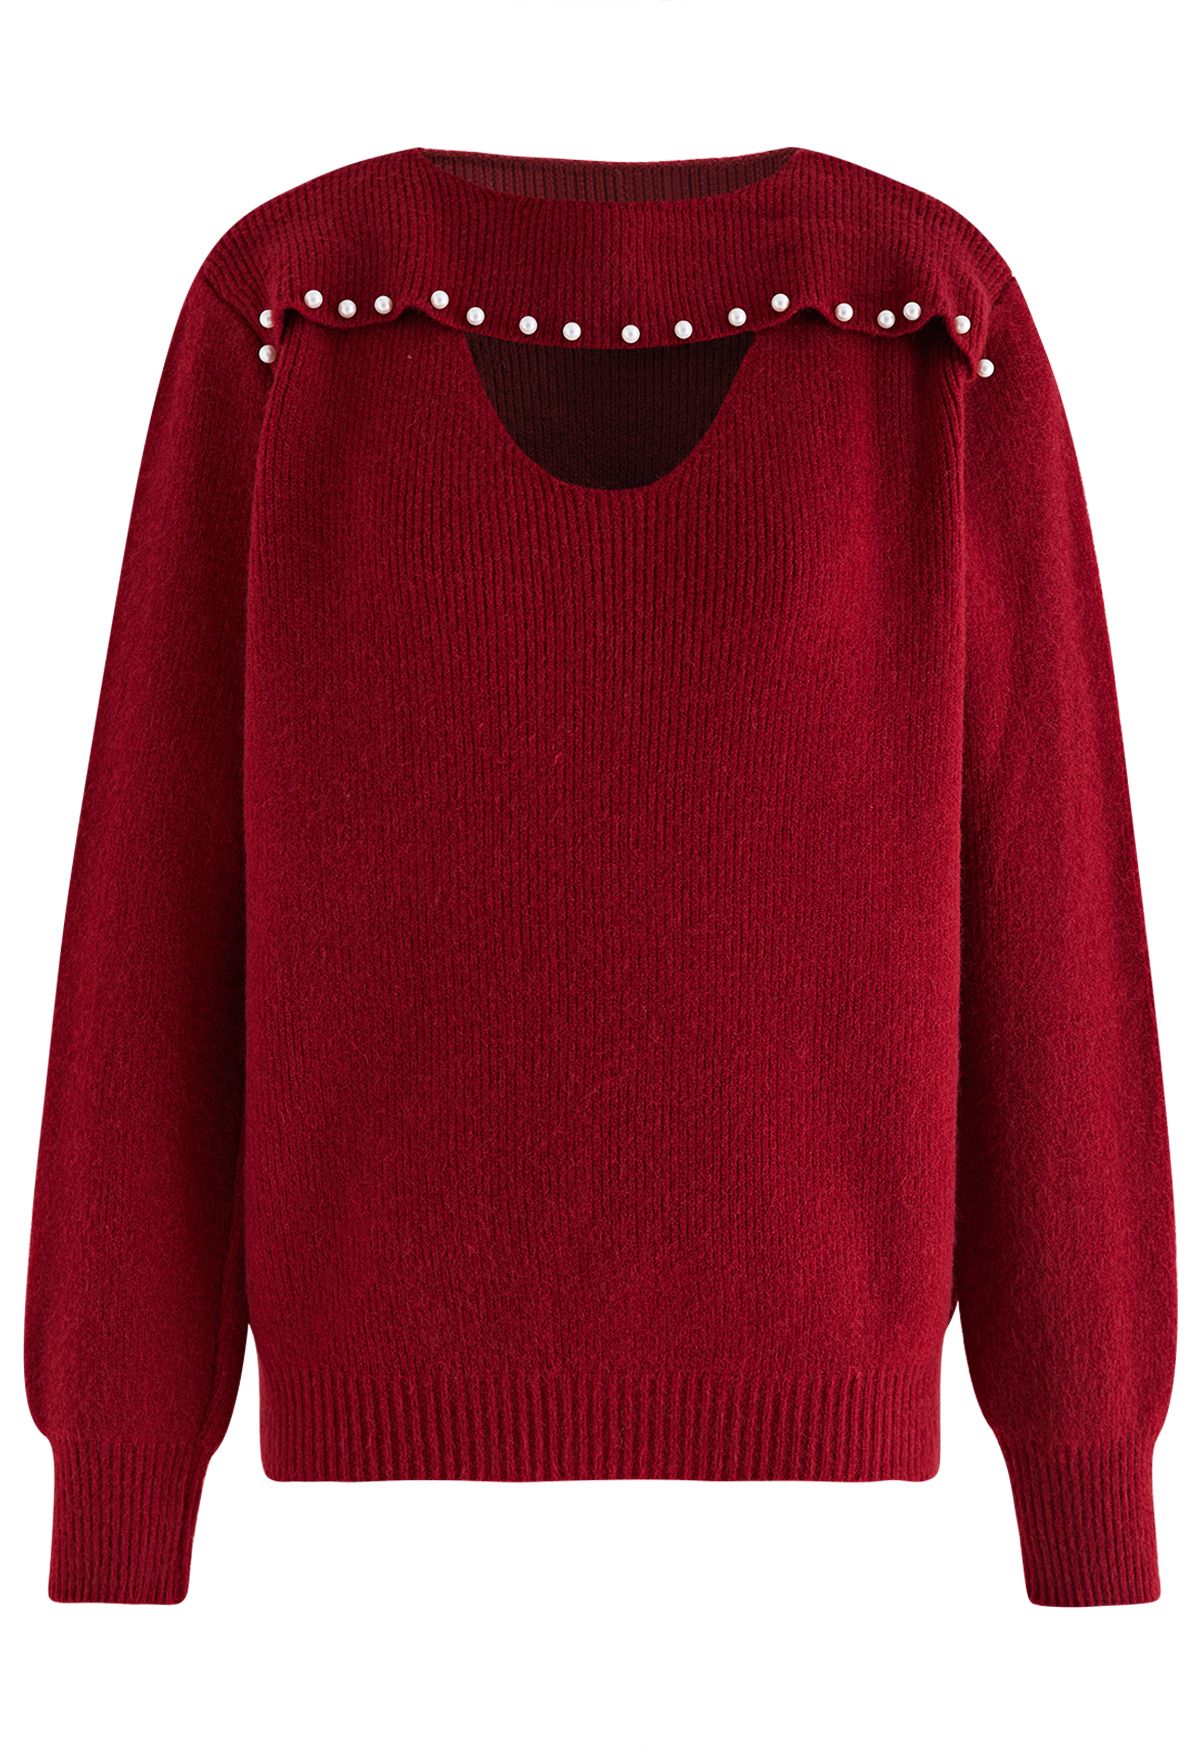 Cutout Pearl Neckline Knit Sweater in Red - Retro, Indie and Unique Fashion